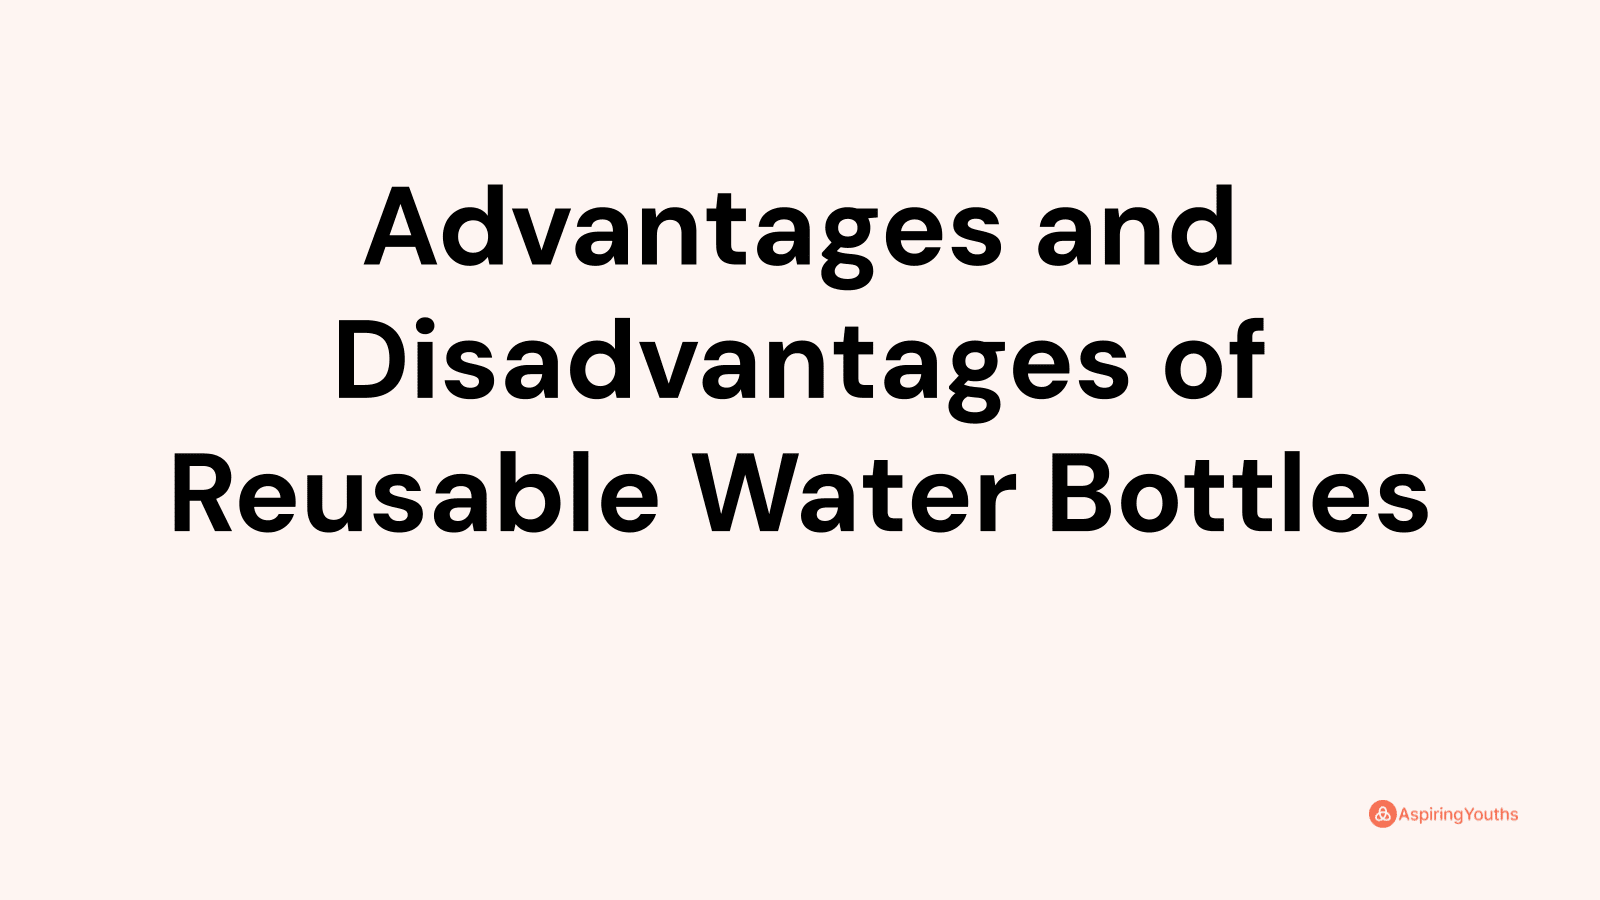 Advantages and disadvantages of Reusable Water Bottles